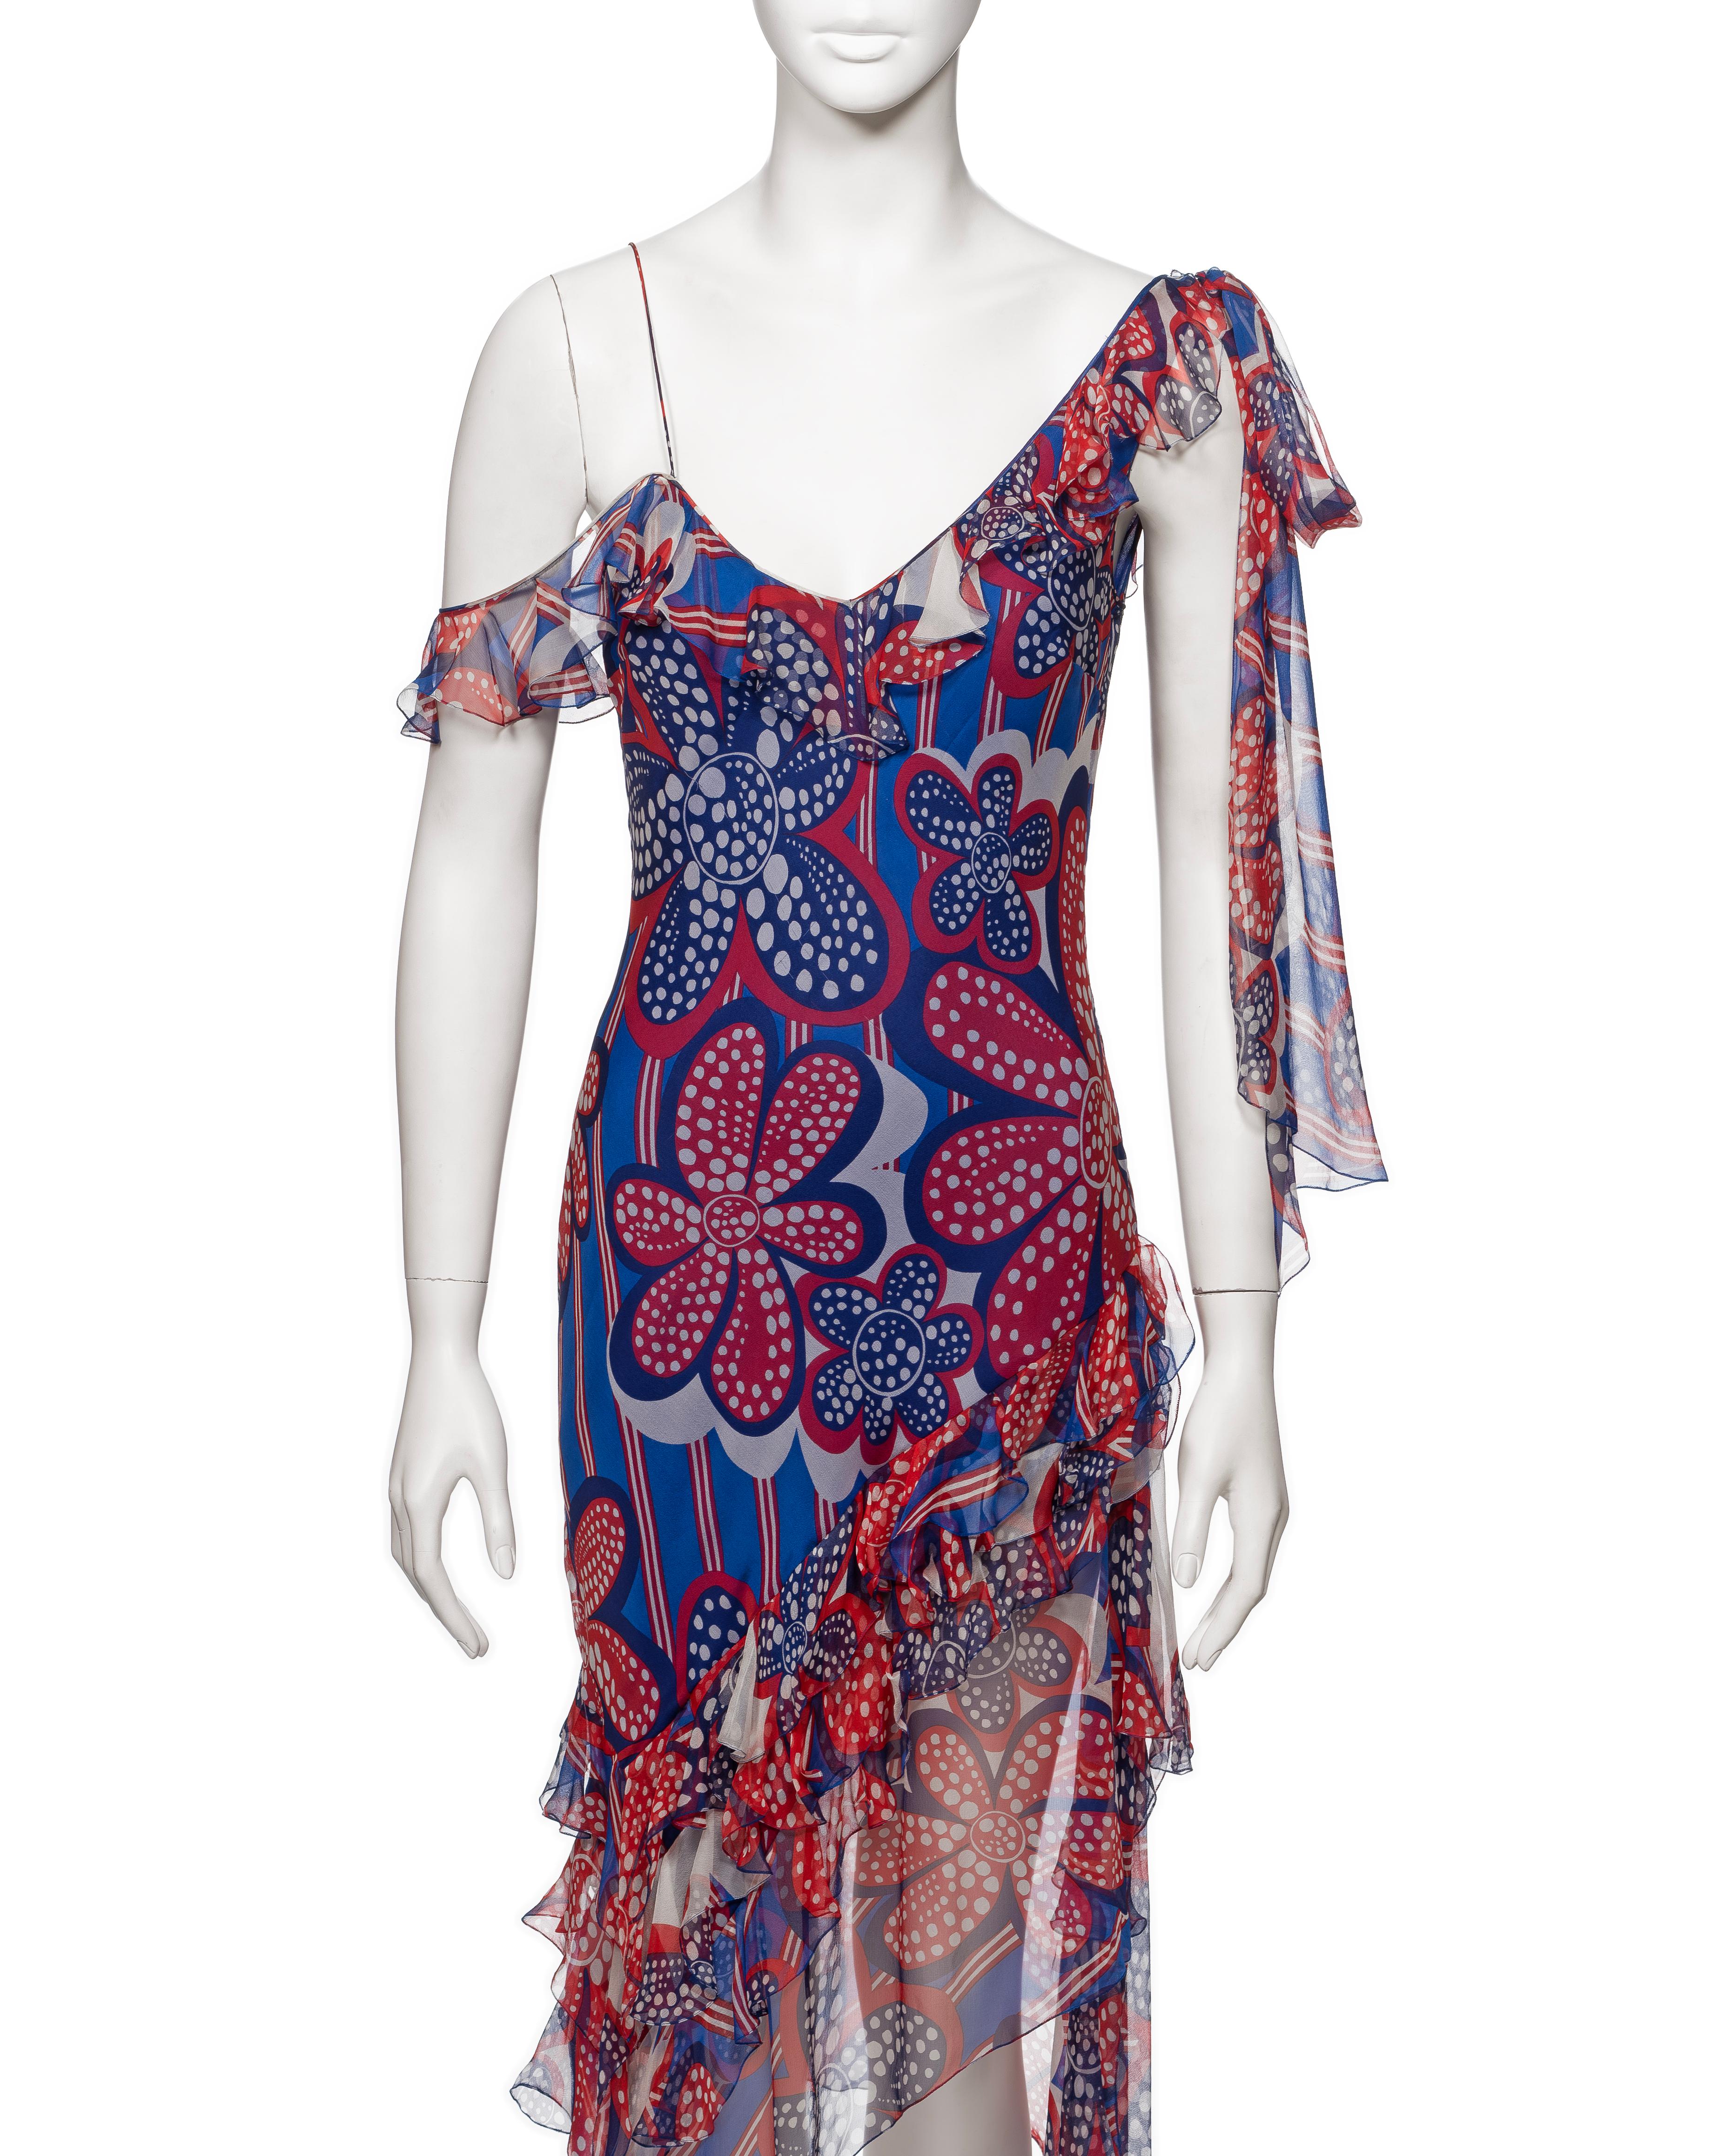 John Galliano Red and Blue Floral Print Silk Chiffon Slip Dress, SS 2002 In Excellent Condition For Sale In London, GB